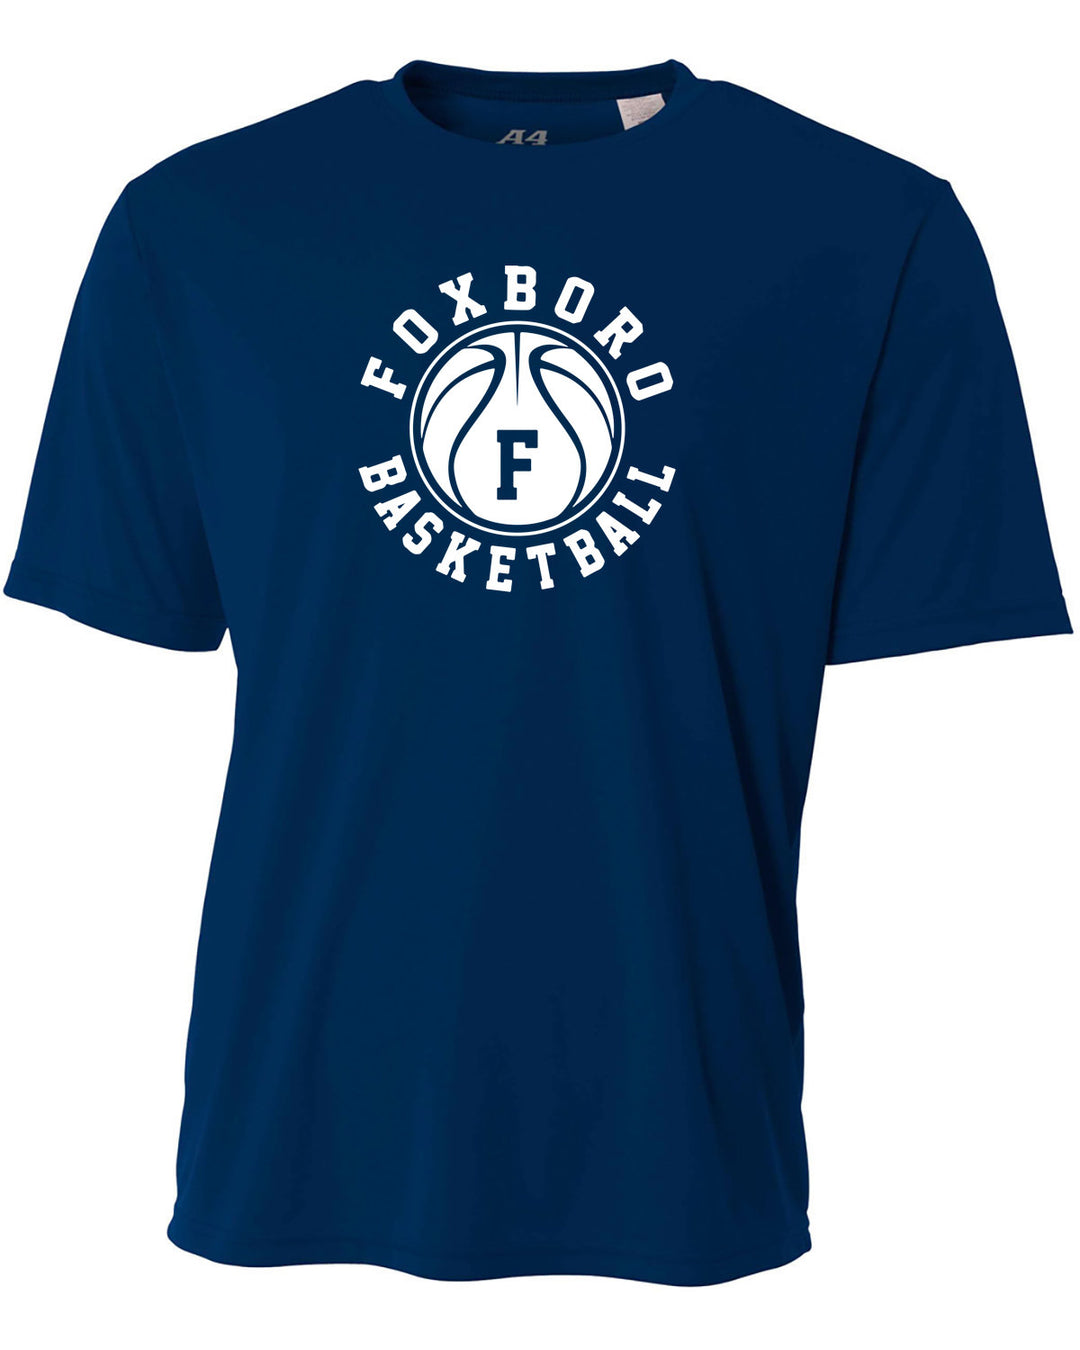 Foxboro Youth Basketball A4 Youth Cooling Performance T-Shirt (NB3142)